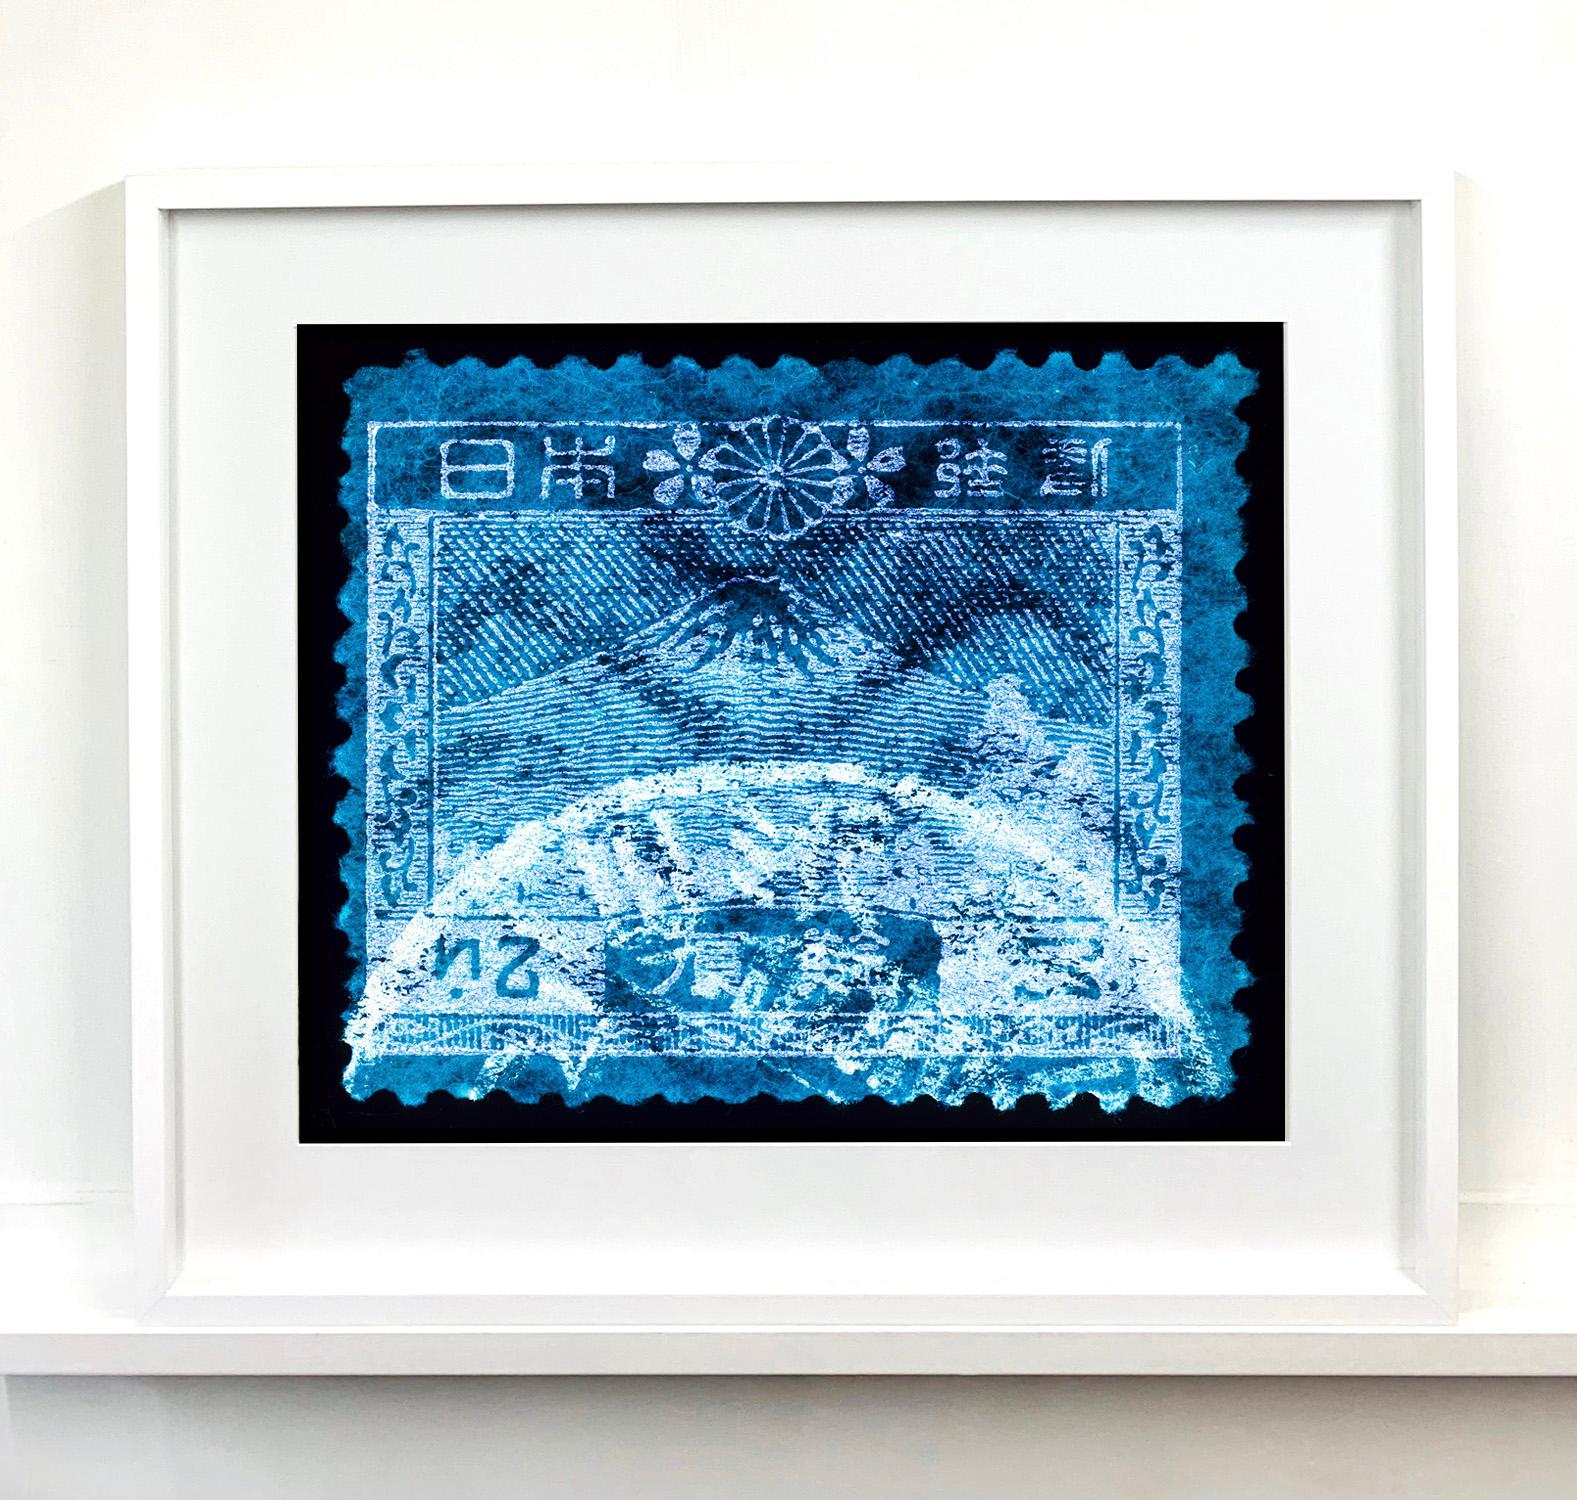 Japapese Stamp Collection 'Mount Fuji' - Conceptual Pop Art Color Photography - Blue Landscape Photograph by Heidler & Heeps